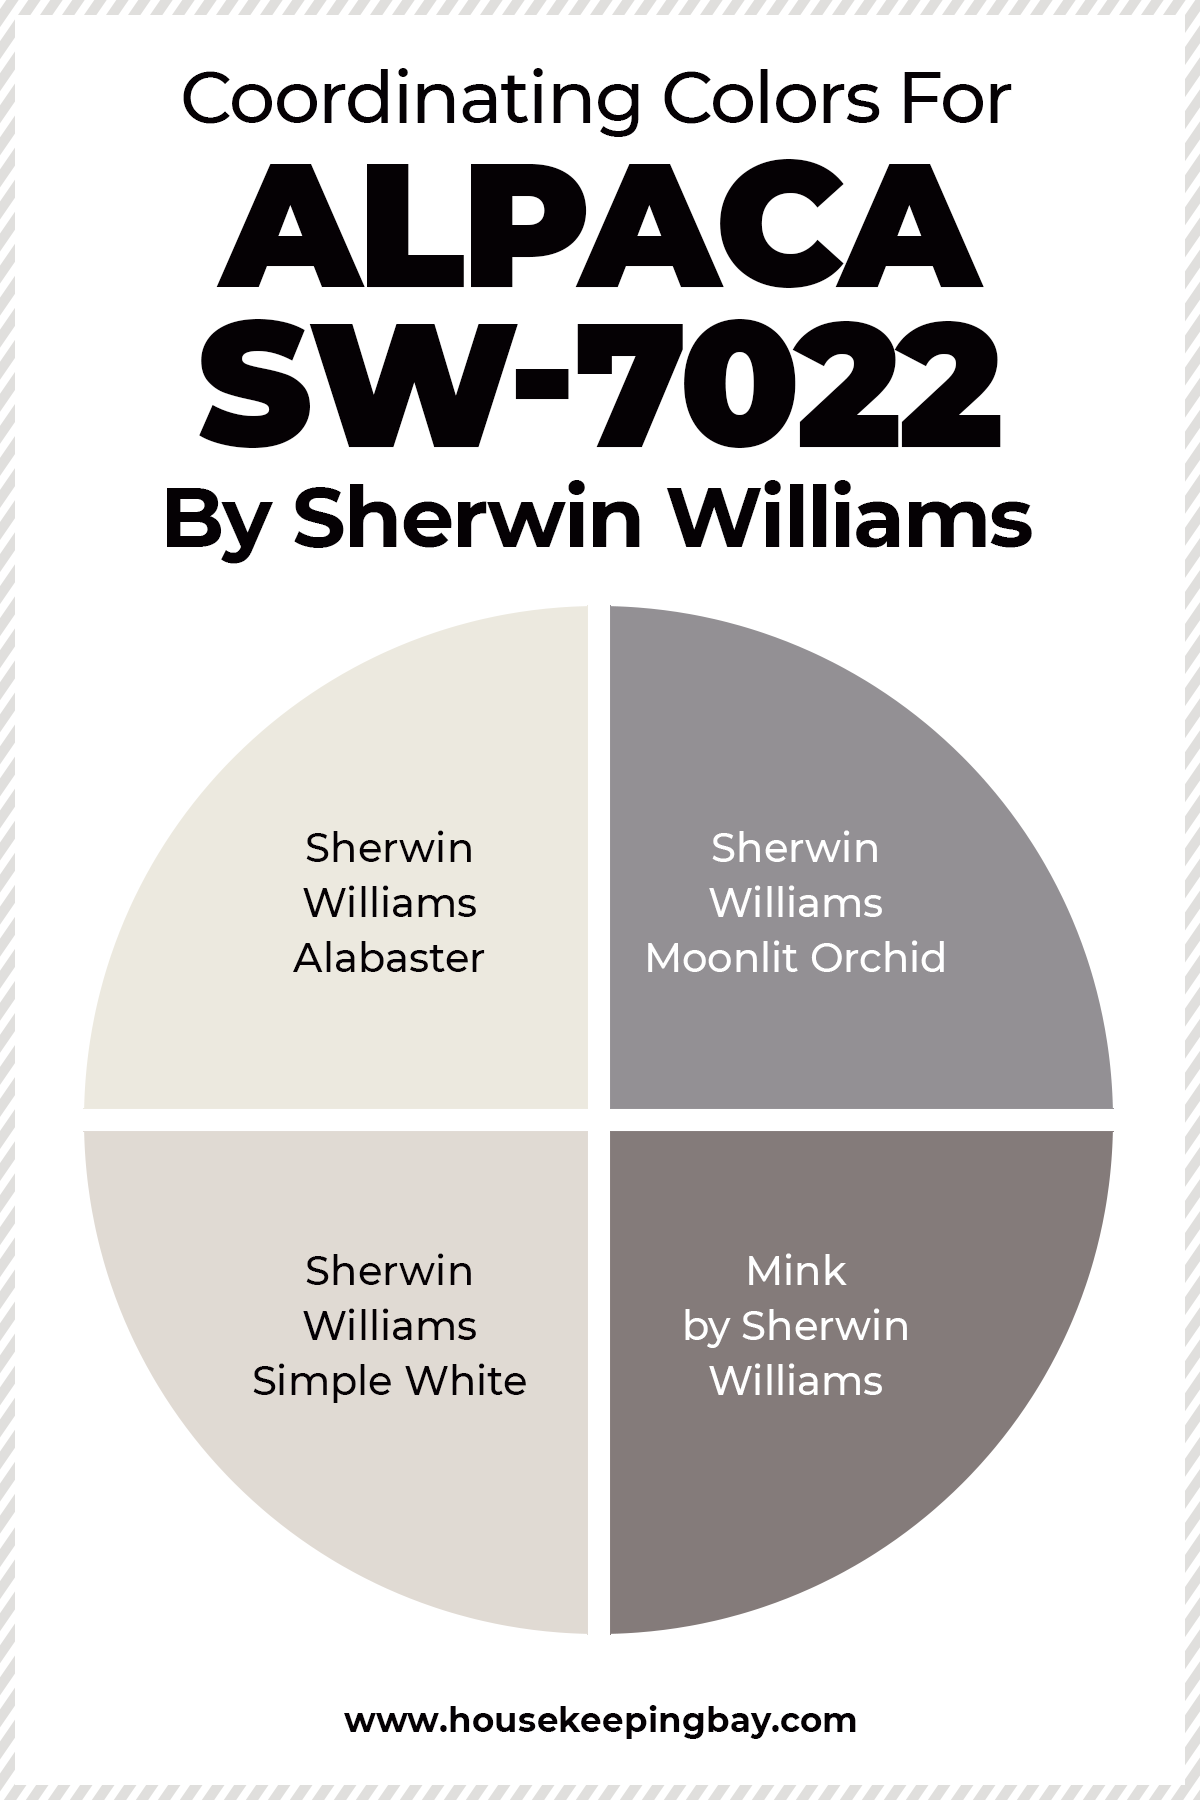 Alpaca SW 7022 By Sherwin Williams Coordinating colors